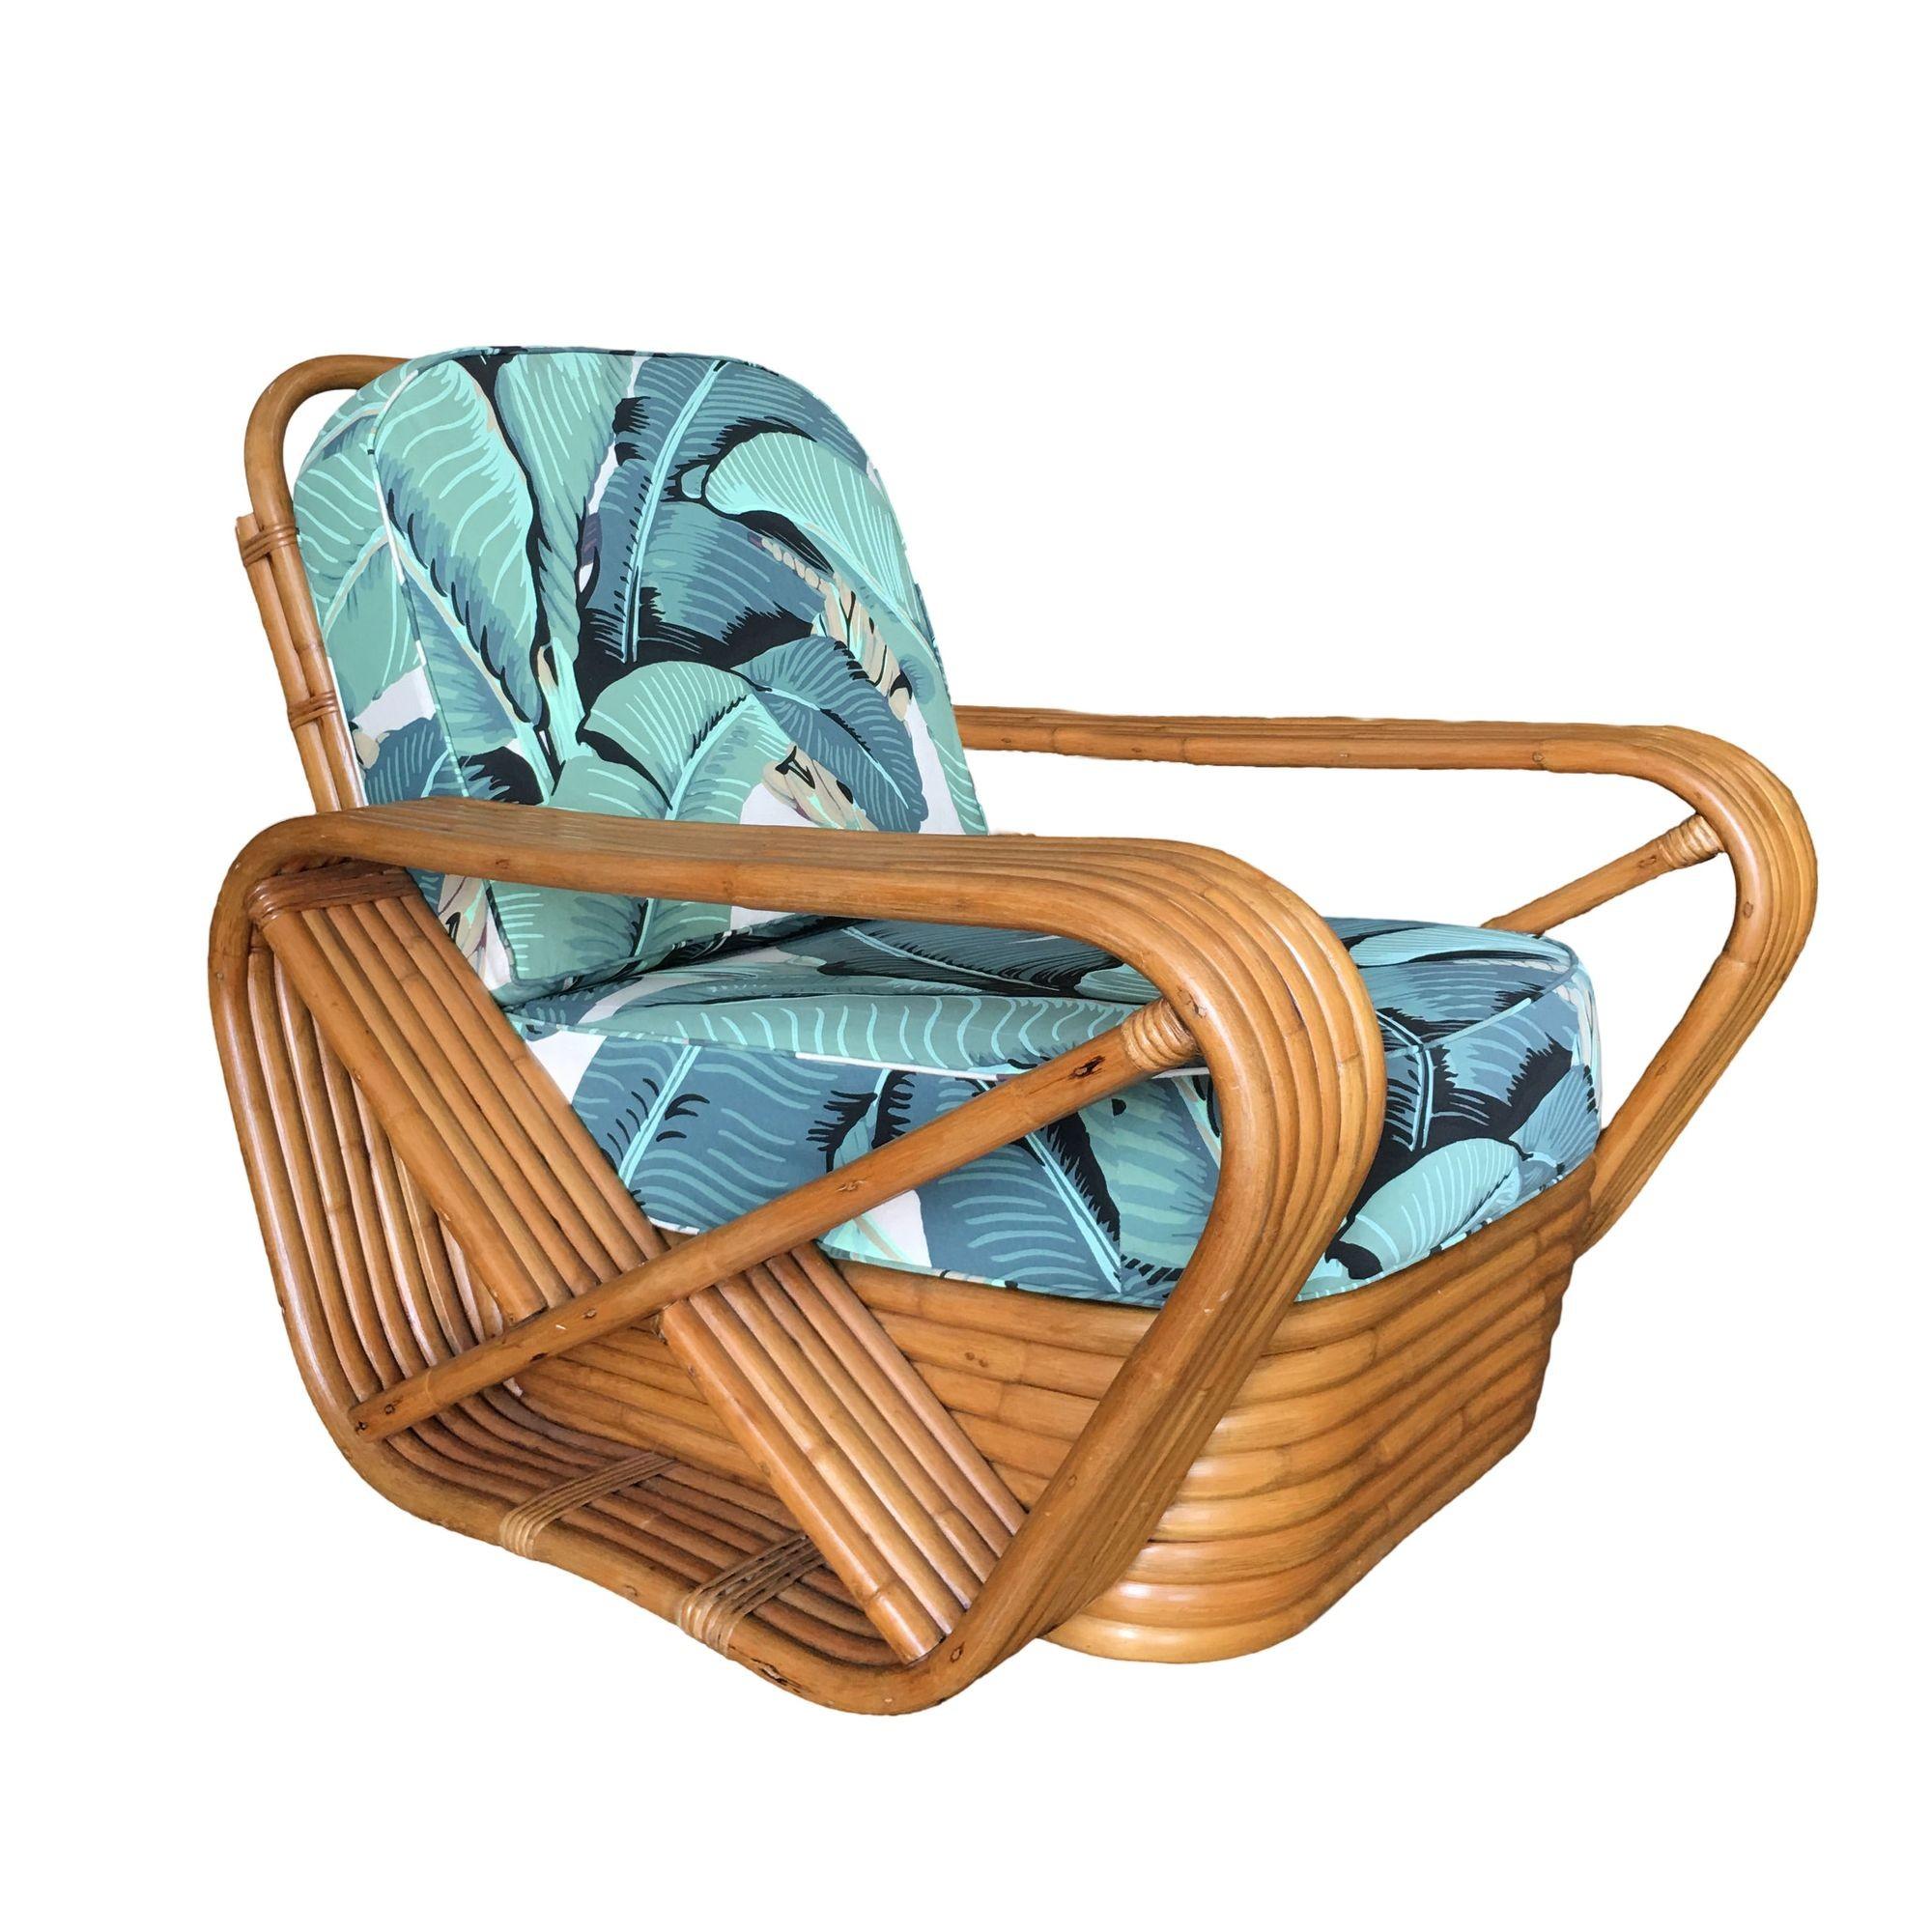 Designed in the manner of Paul Frankl this six-strand rattan lounge chair features square pretzel arms and the classic stacked rattan base with 